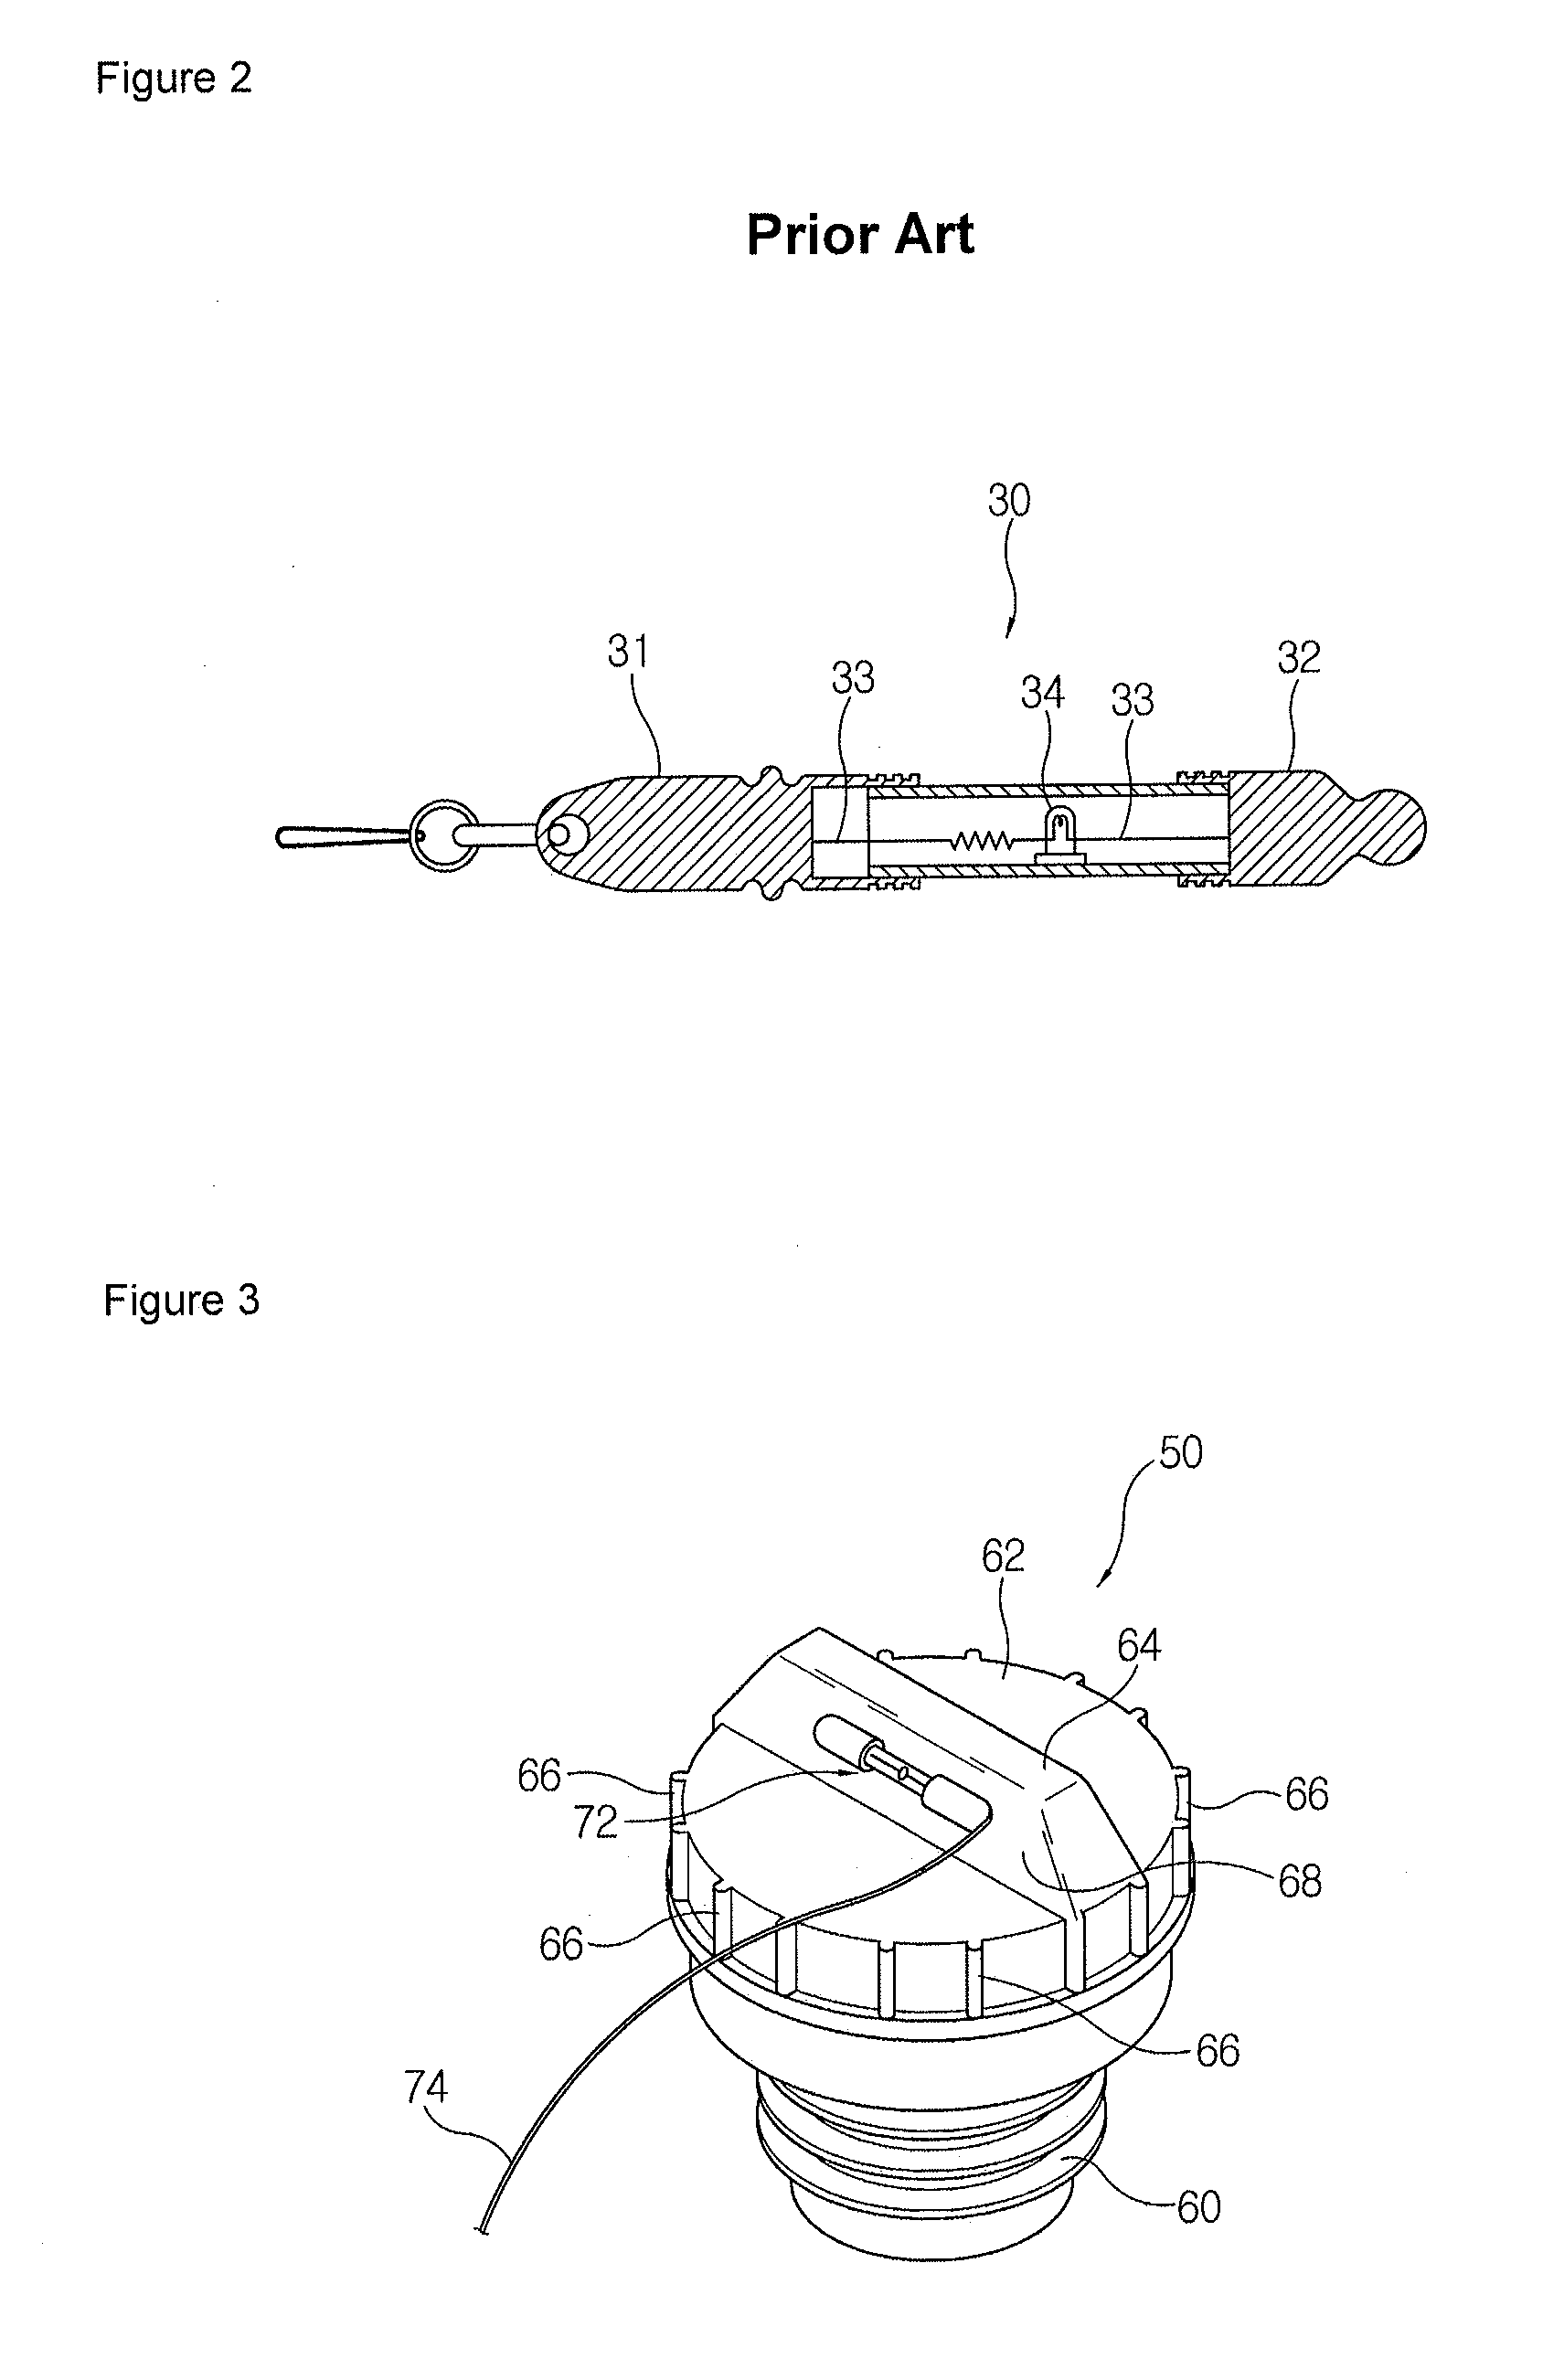 Fuel injection hole cap for preventing explosion due to static electricity